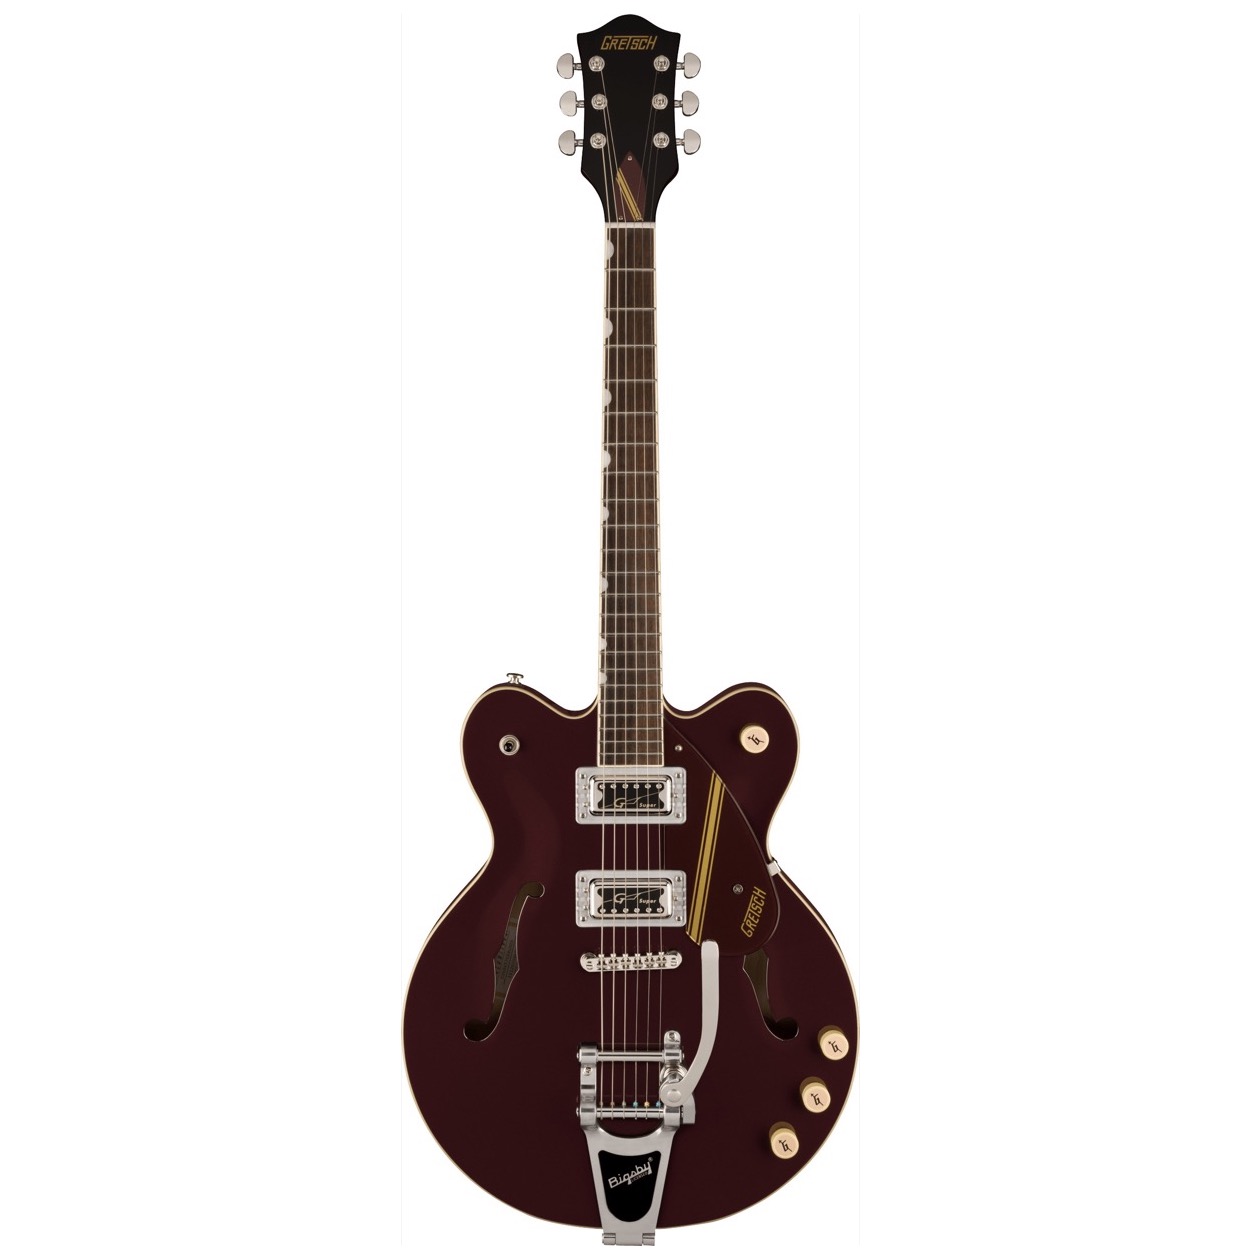 Gretsch G 2604 T / G2604T Limited Edition Streamliner Rally II Center Block with Bigsby, Laurel Fingerboard, Two-Tone Oxblood/Walnut Stain, NIEUW 2023 MODEL !